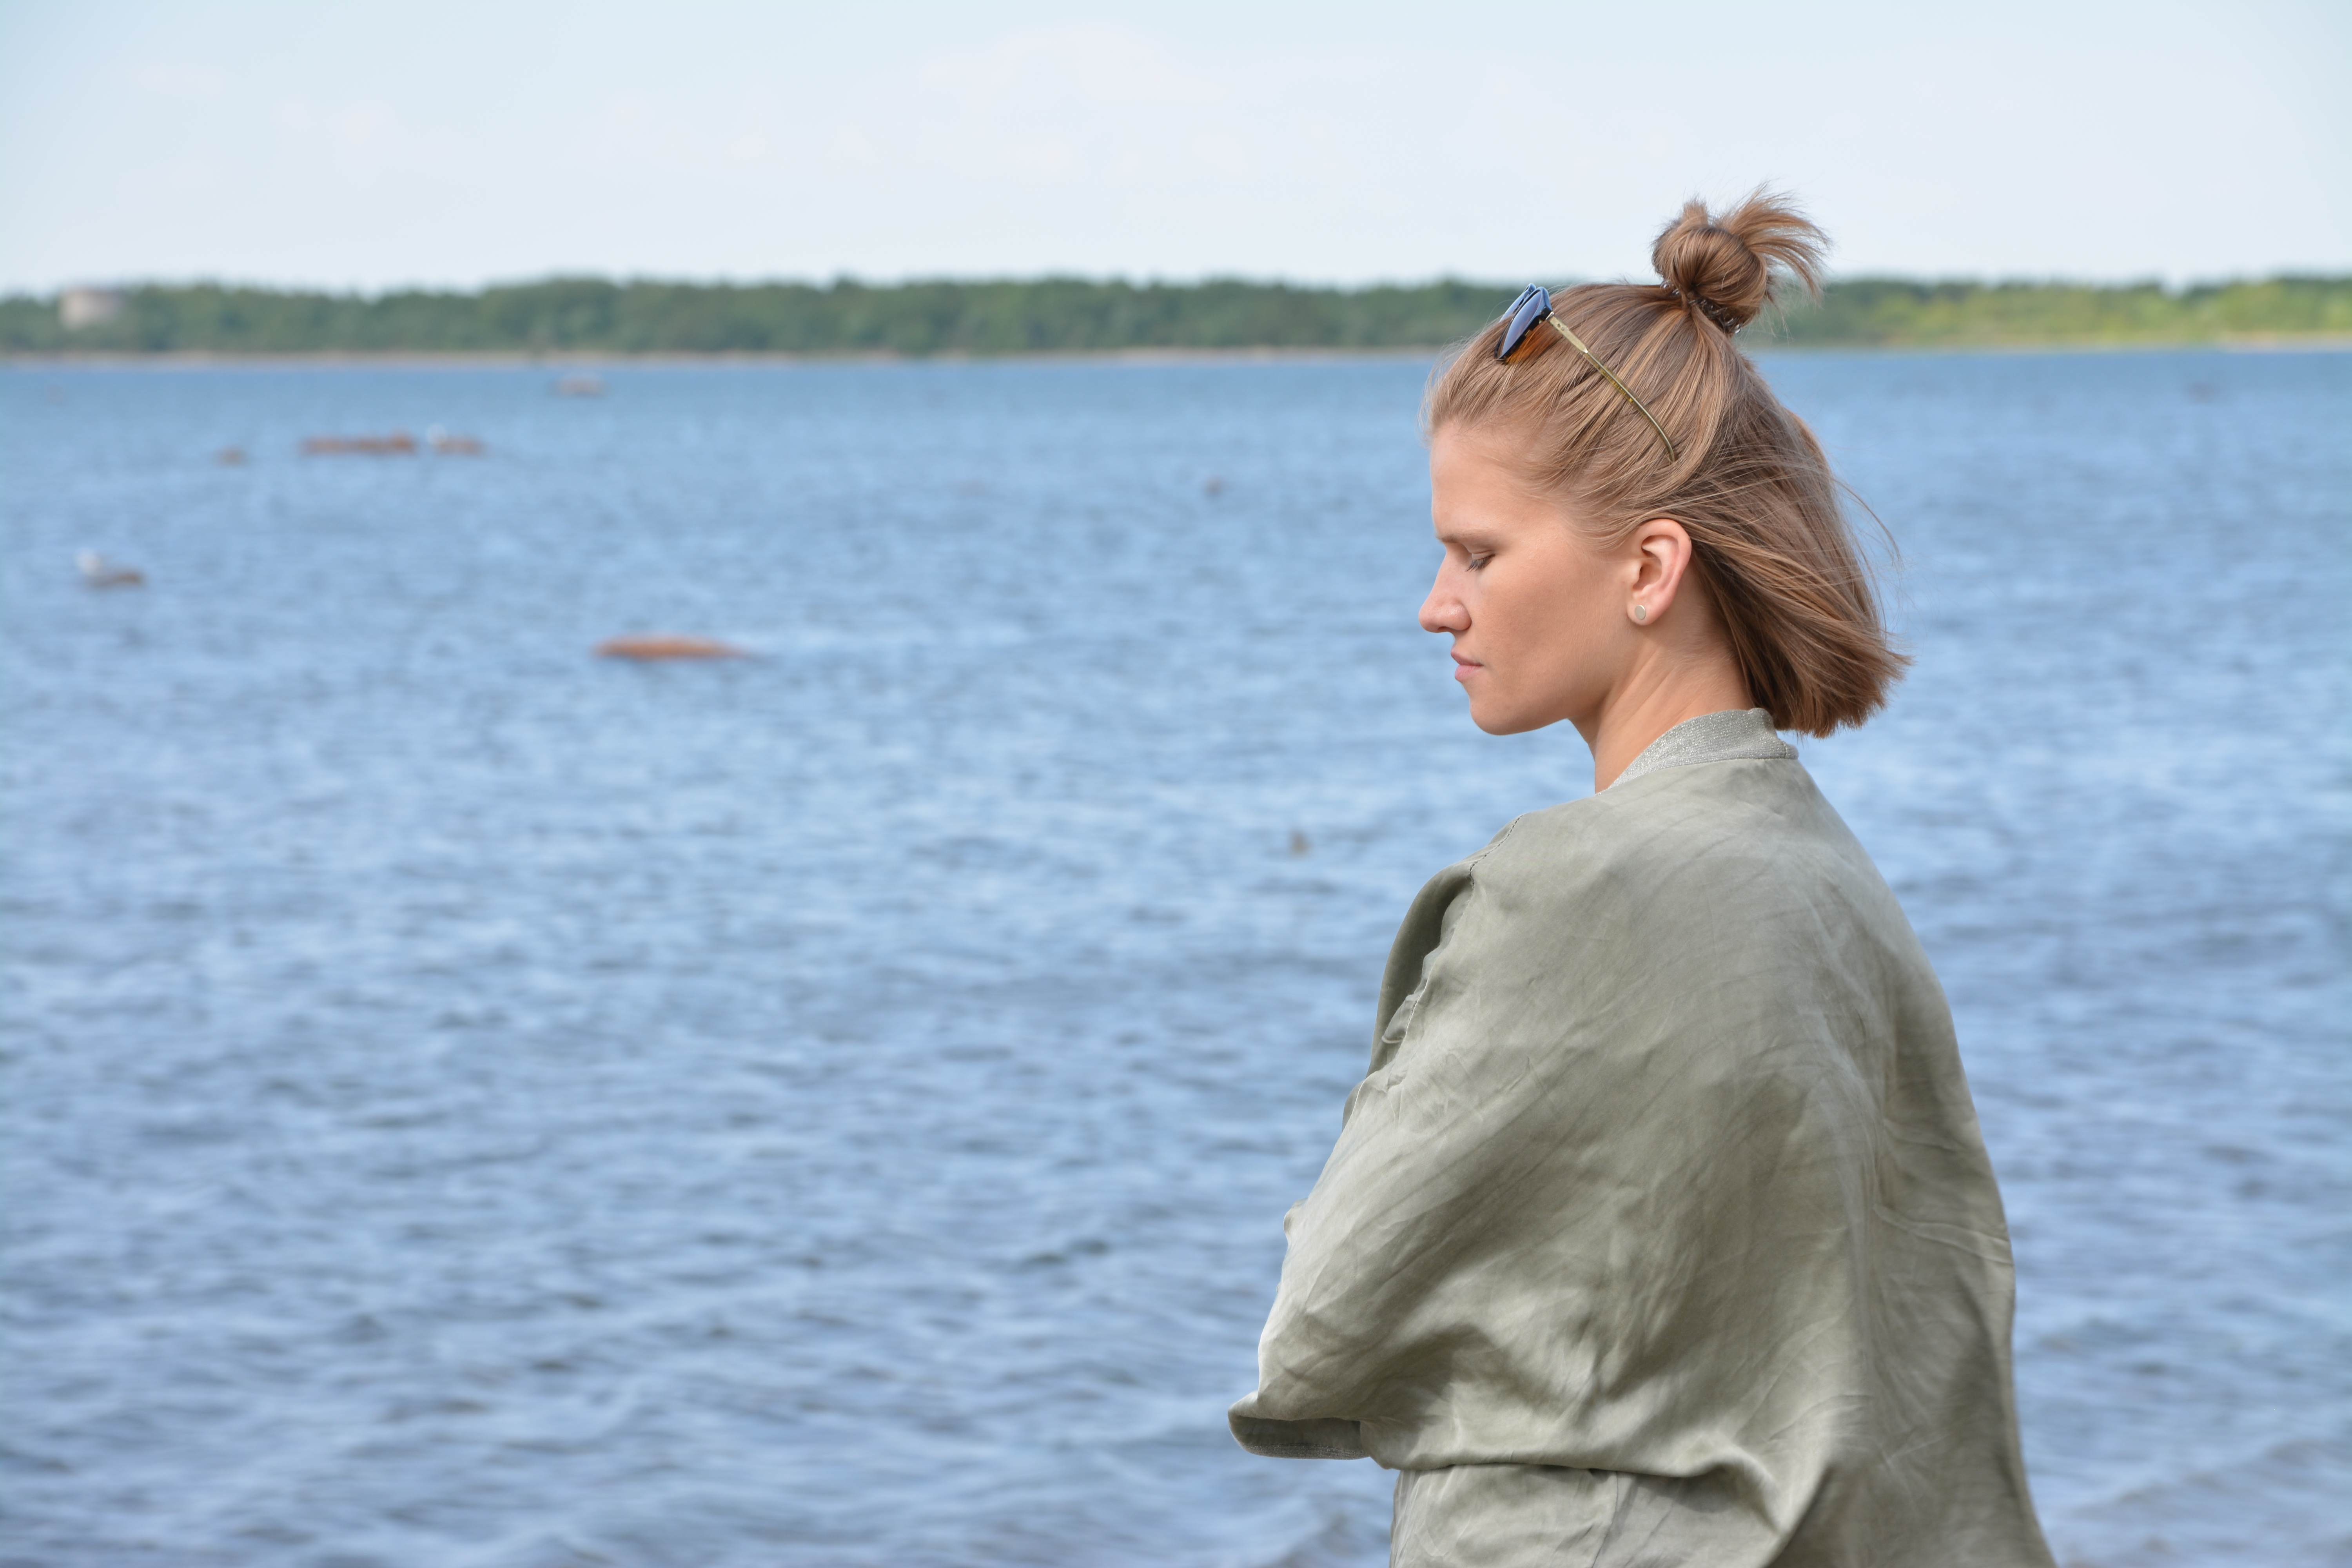 The Estonian singer and violinist Maarja Nuut in front of the Baltic Sea.